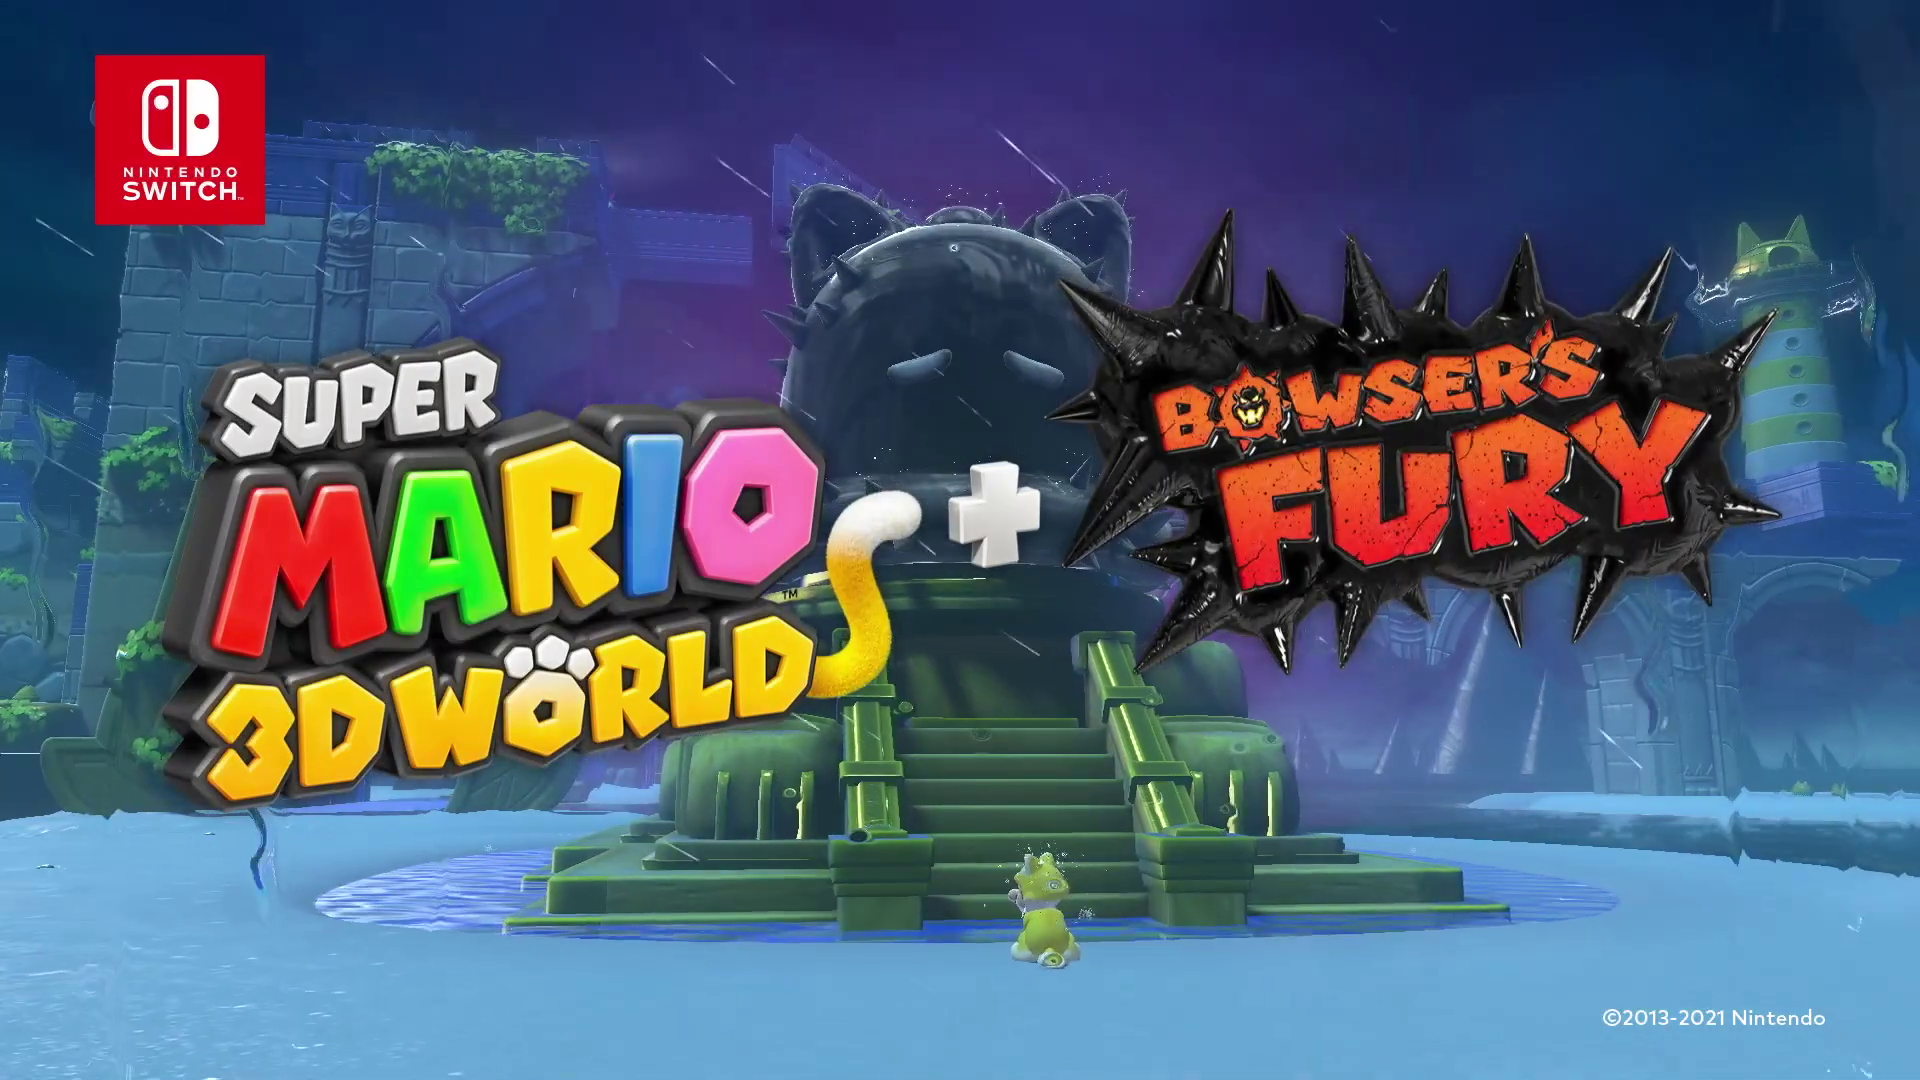 super-mario-3d-world-bowser-s-fury-announced-ggn-switch